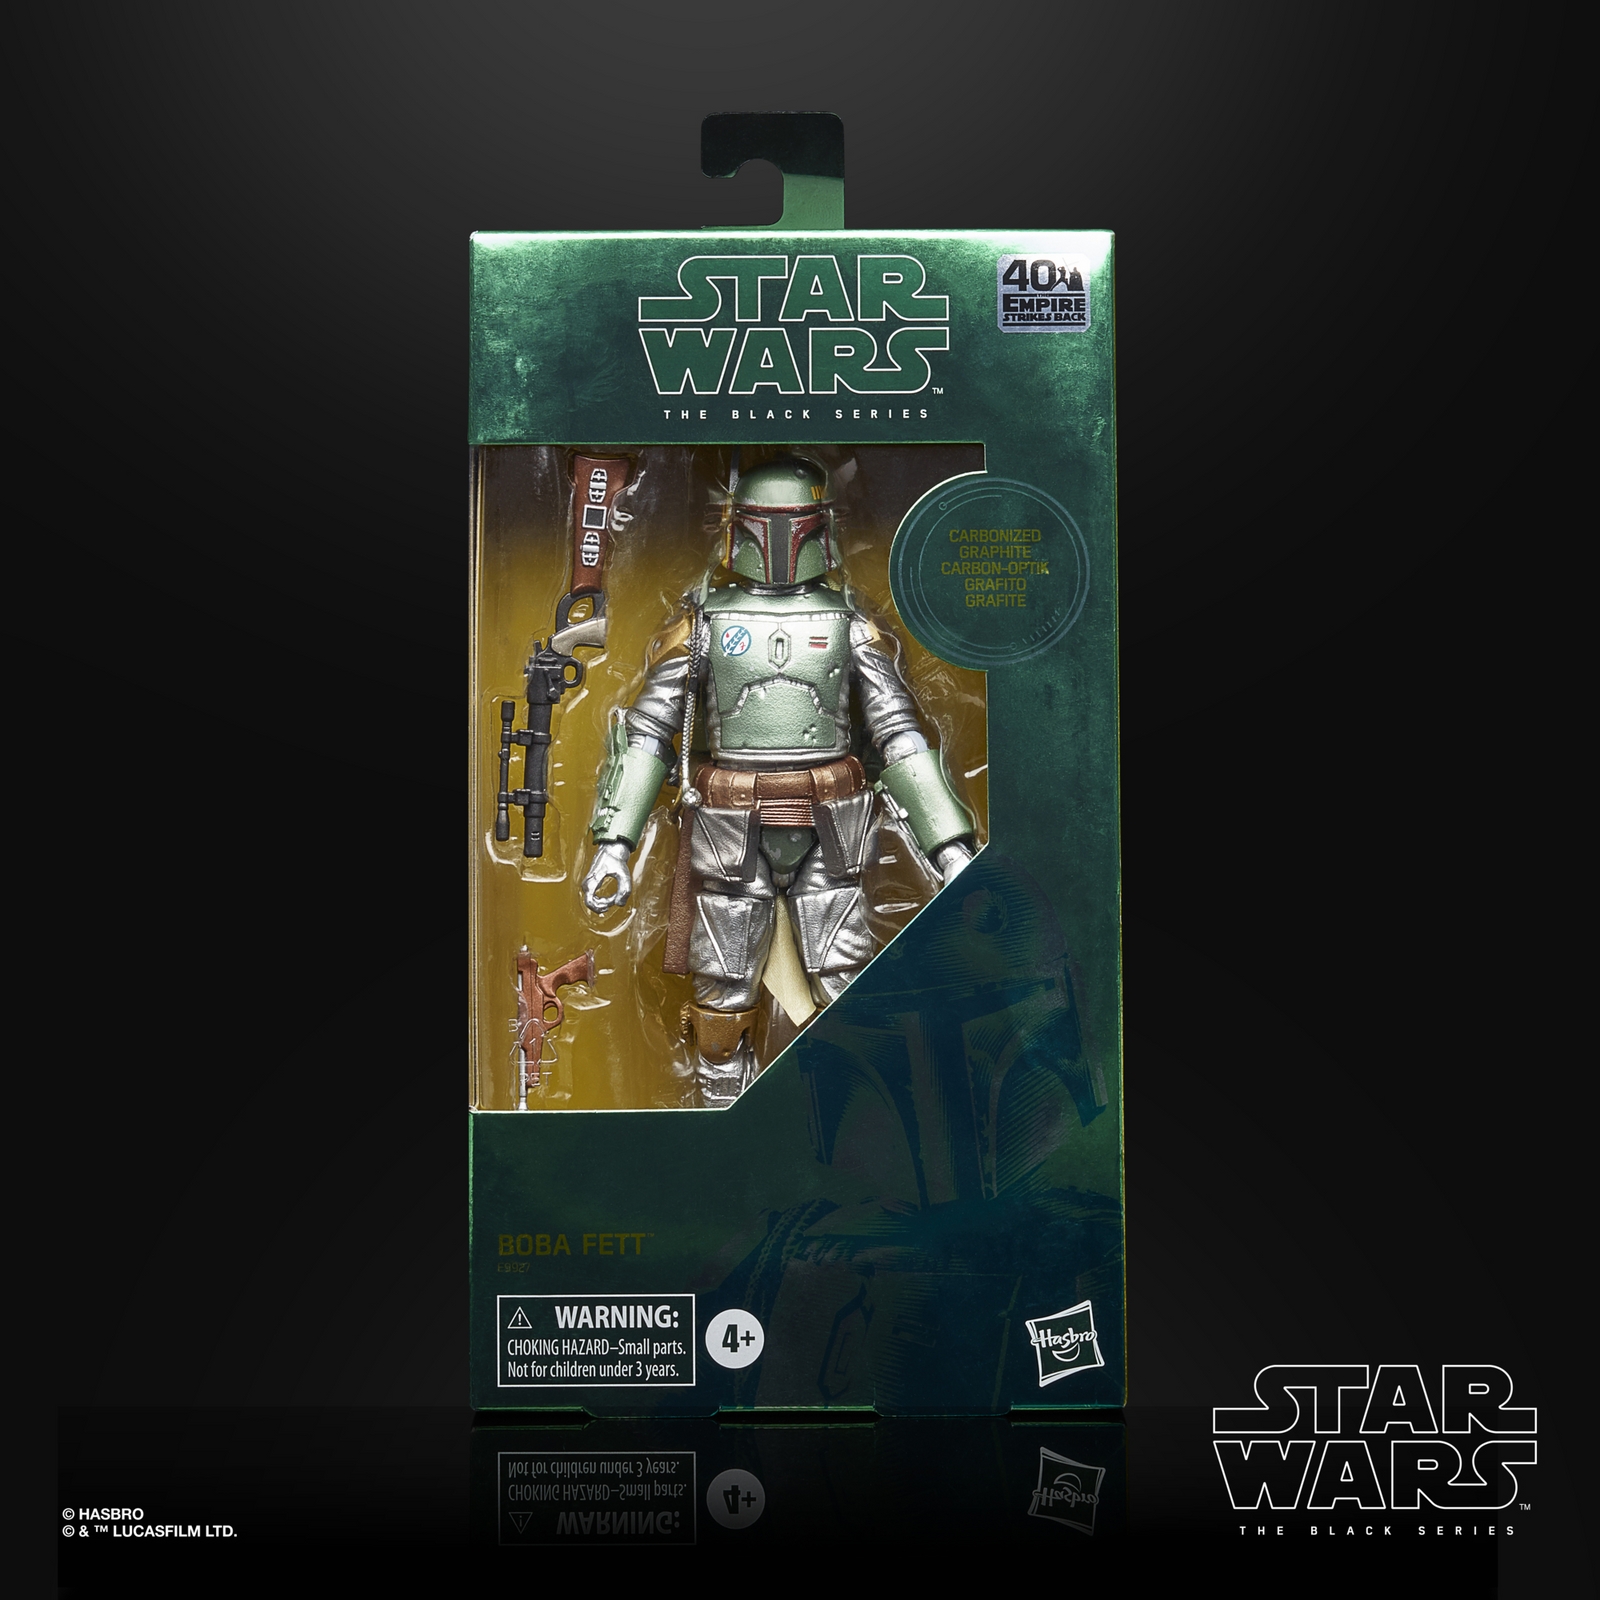 STAR WARS THE BLACK CARBONIZED COLLECTION 6-INCH BOBA FETT Figure - in pck.jpg